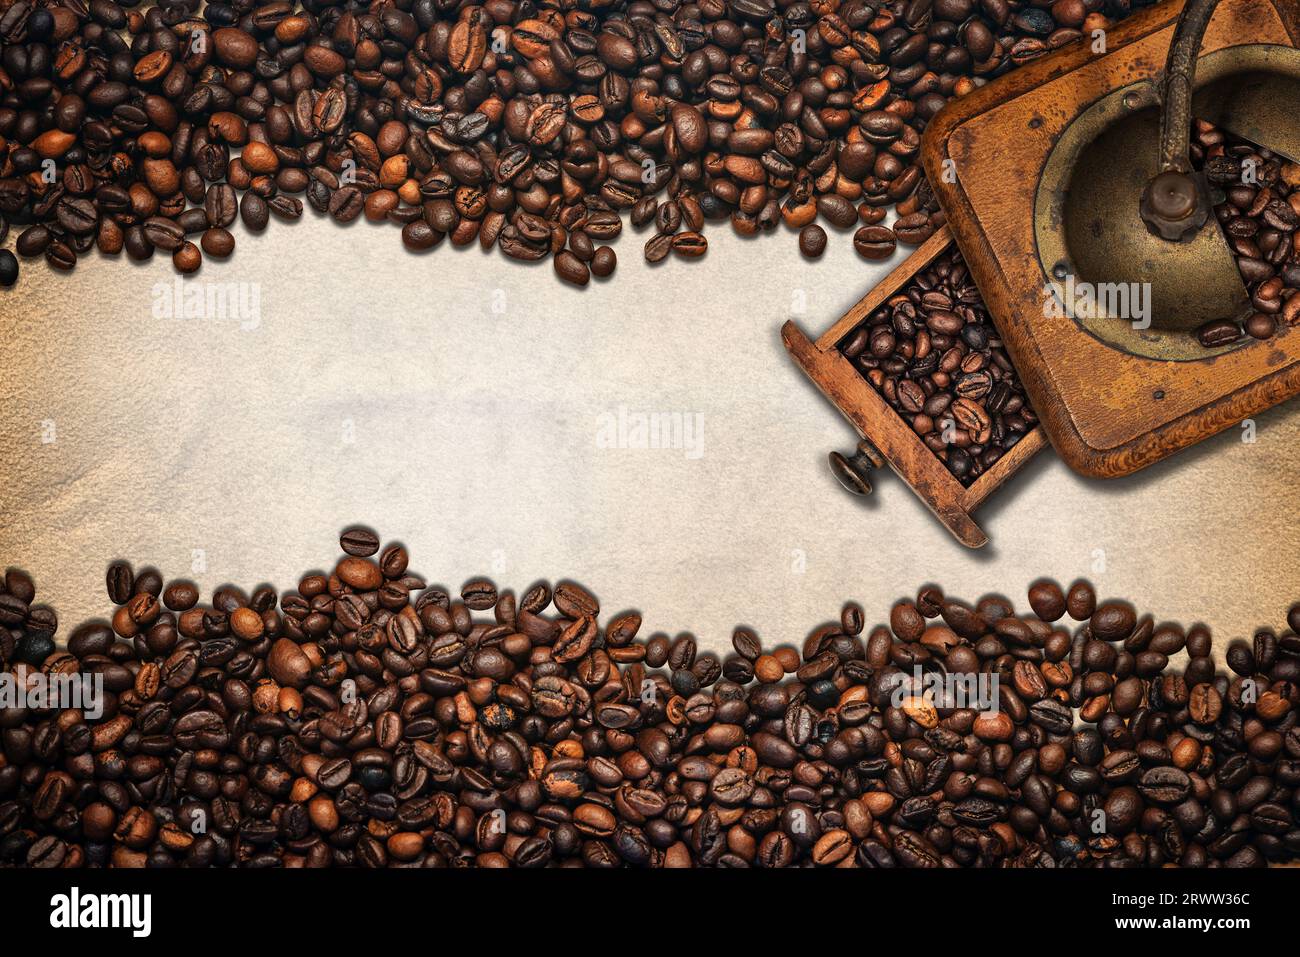 Large group of roasted coffee beans and a manual coffee grinder on a blank parchment with copy space. Horizontal composition. Stock Photo